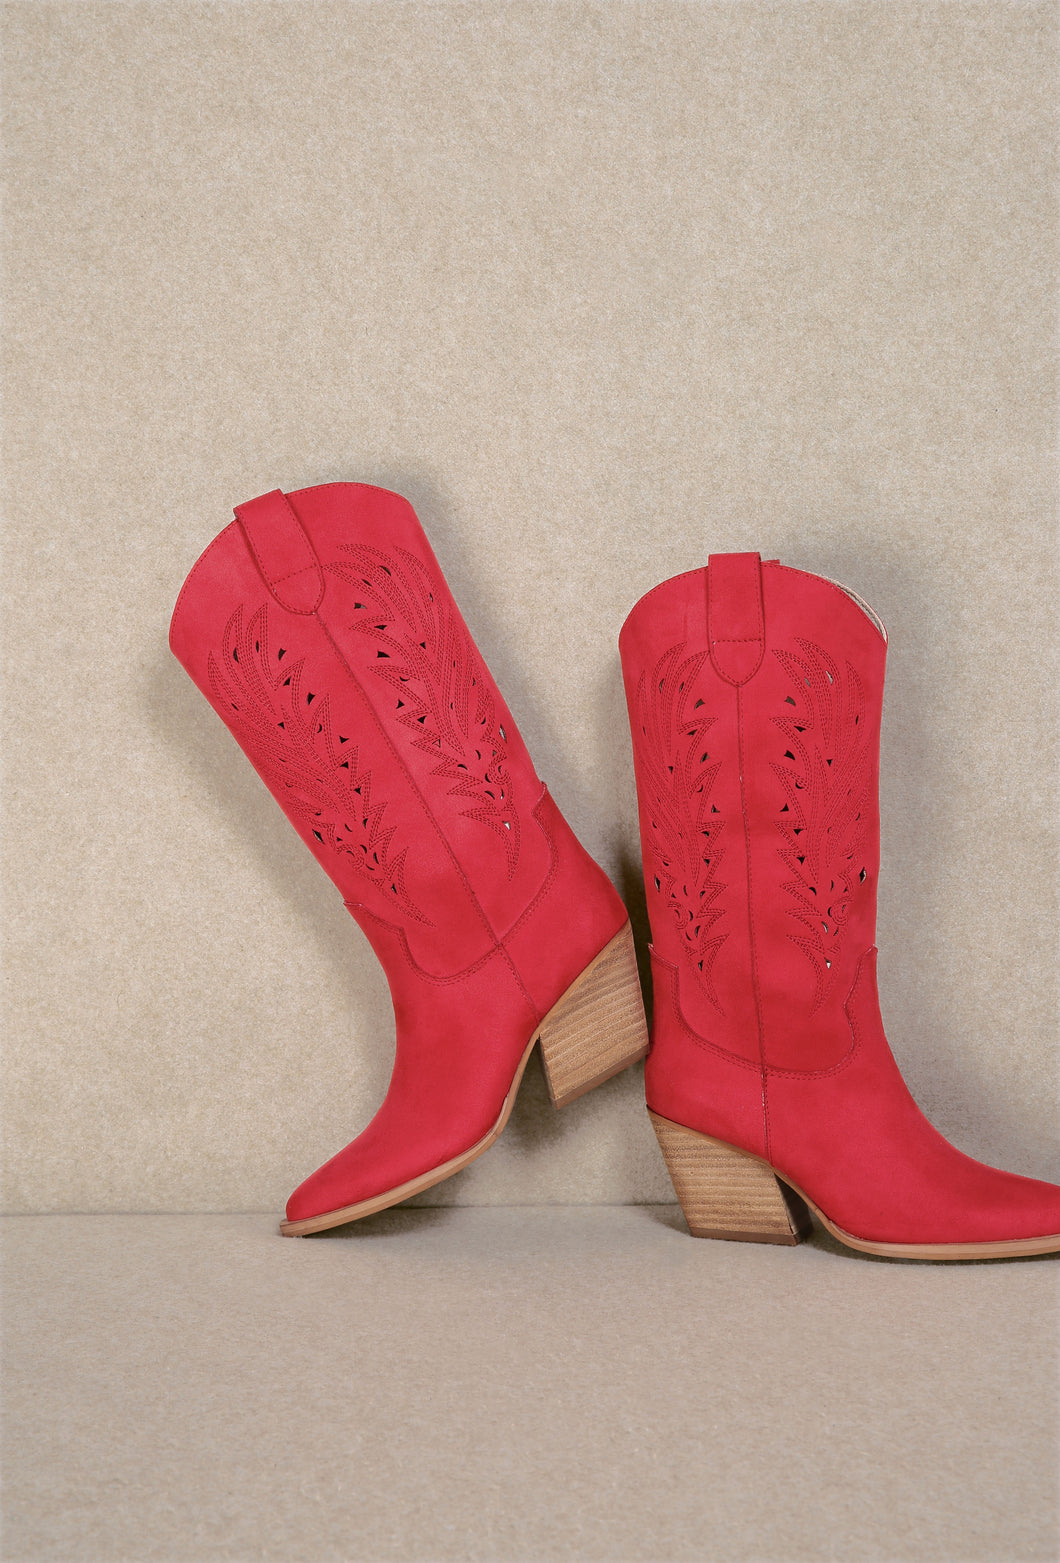 NEWEST ARRIVAL Red Western Boots